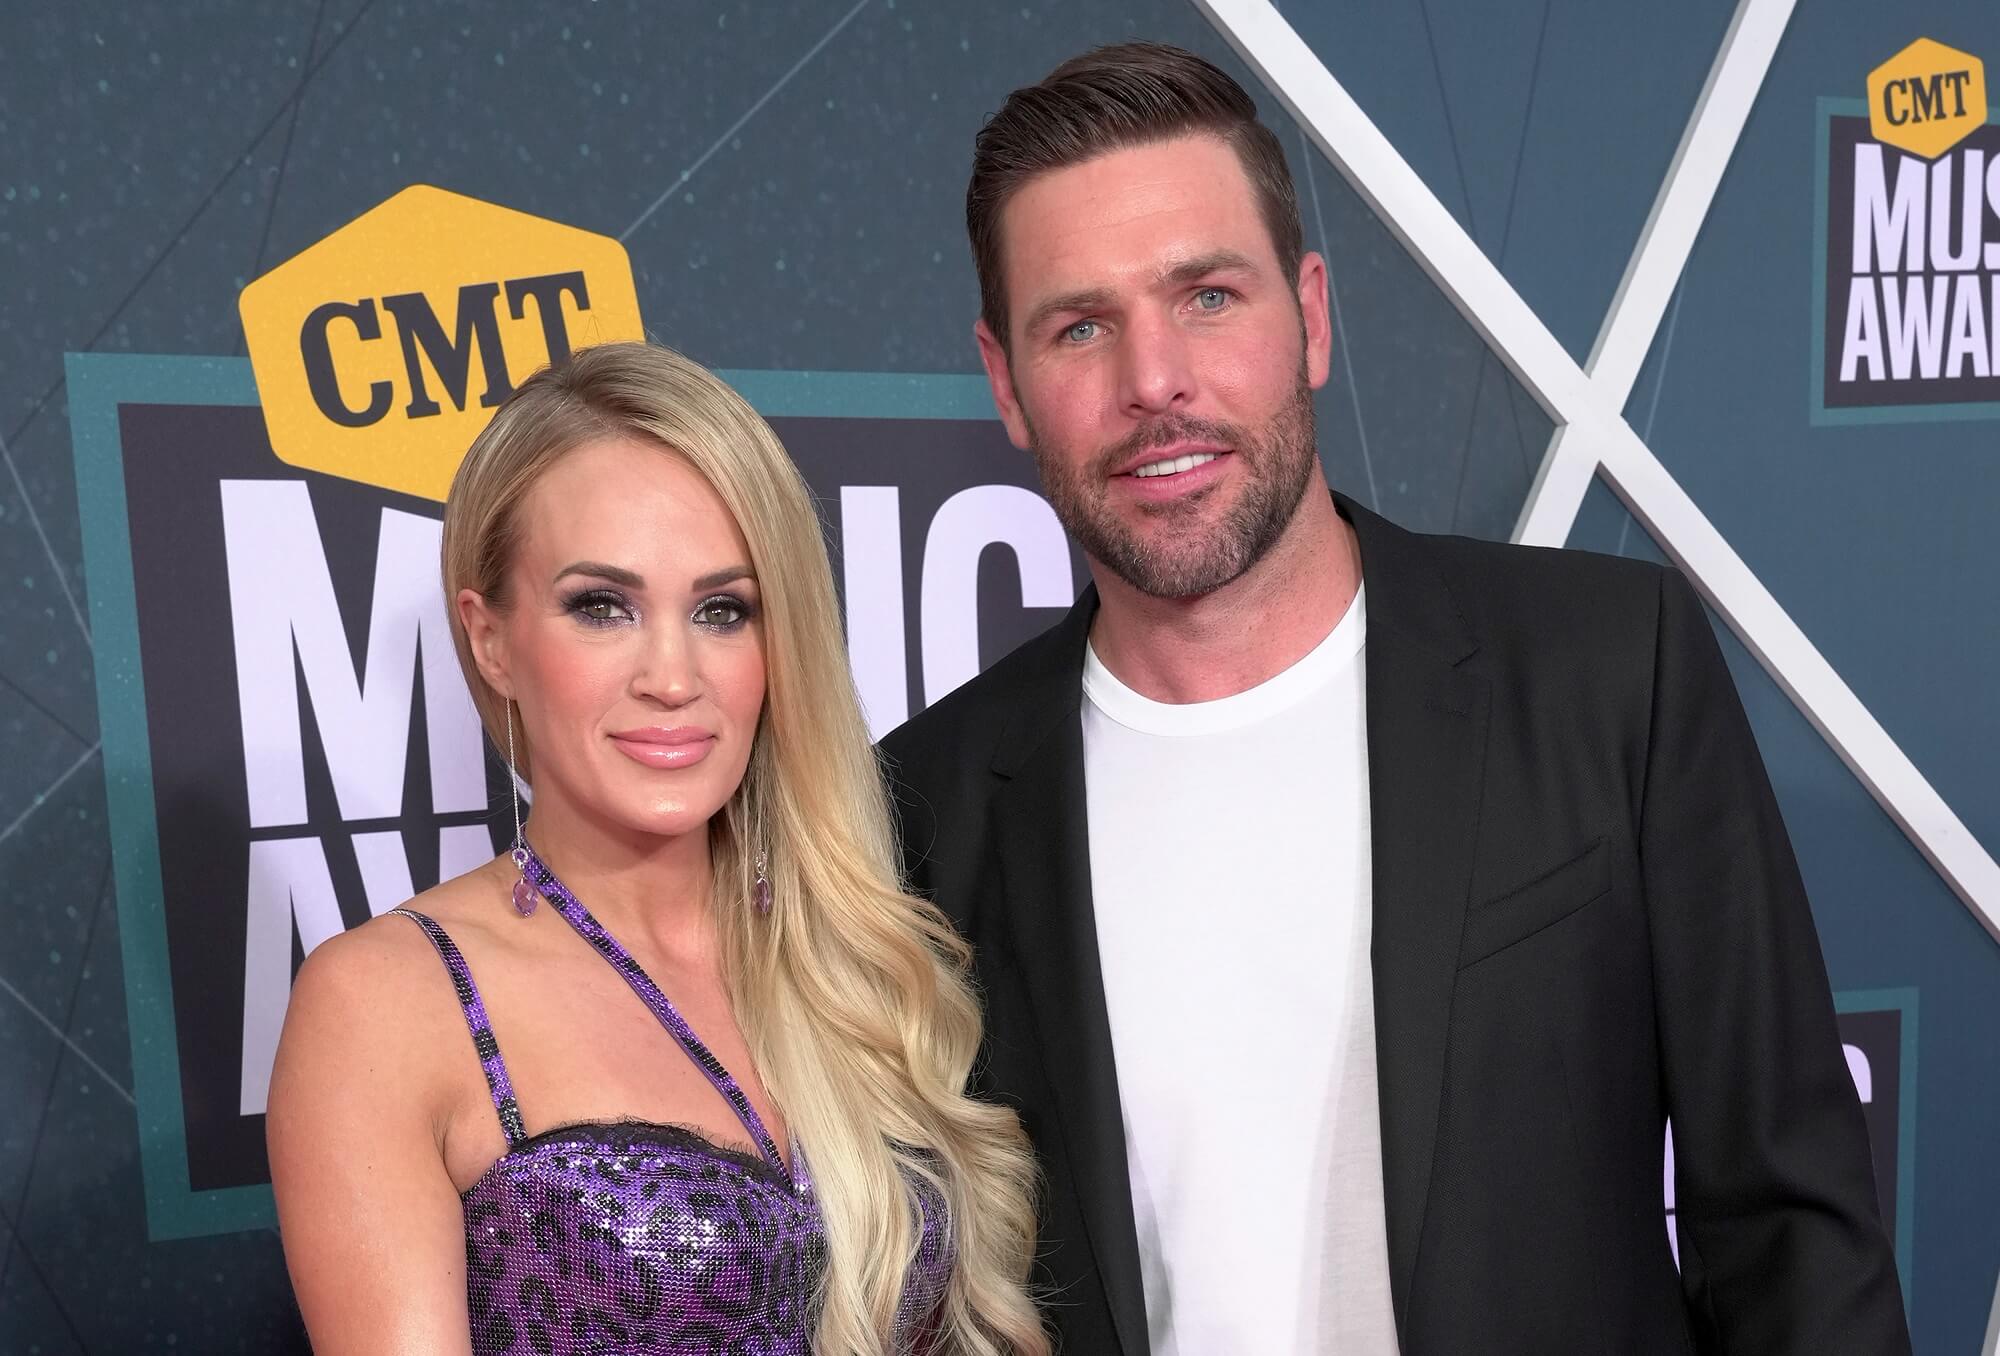 Carrie Underwood and Mike Fisher look into the camera while standing side by side